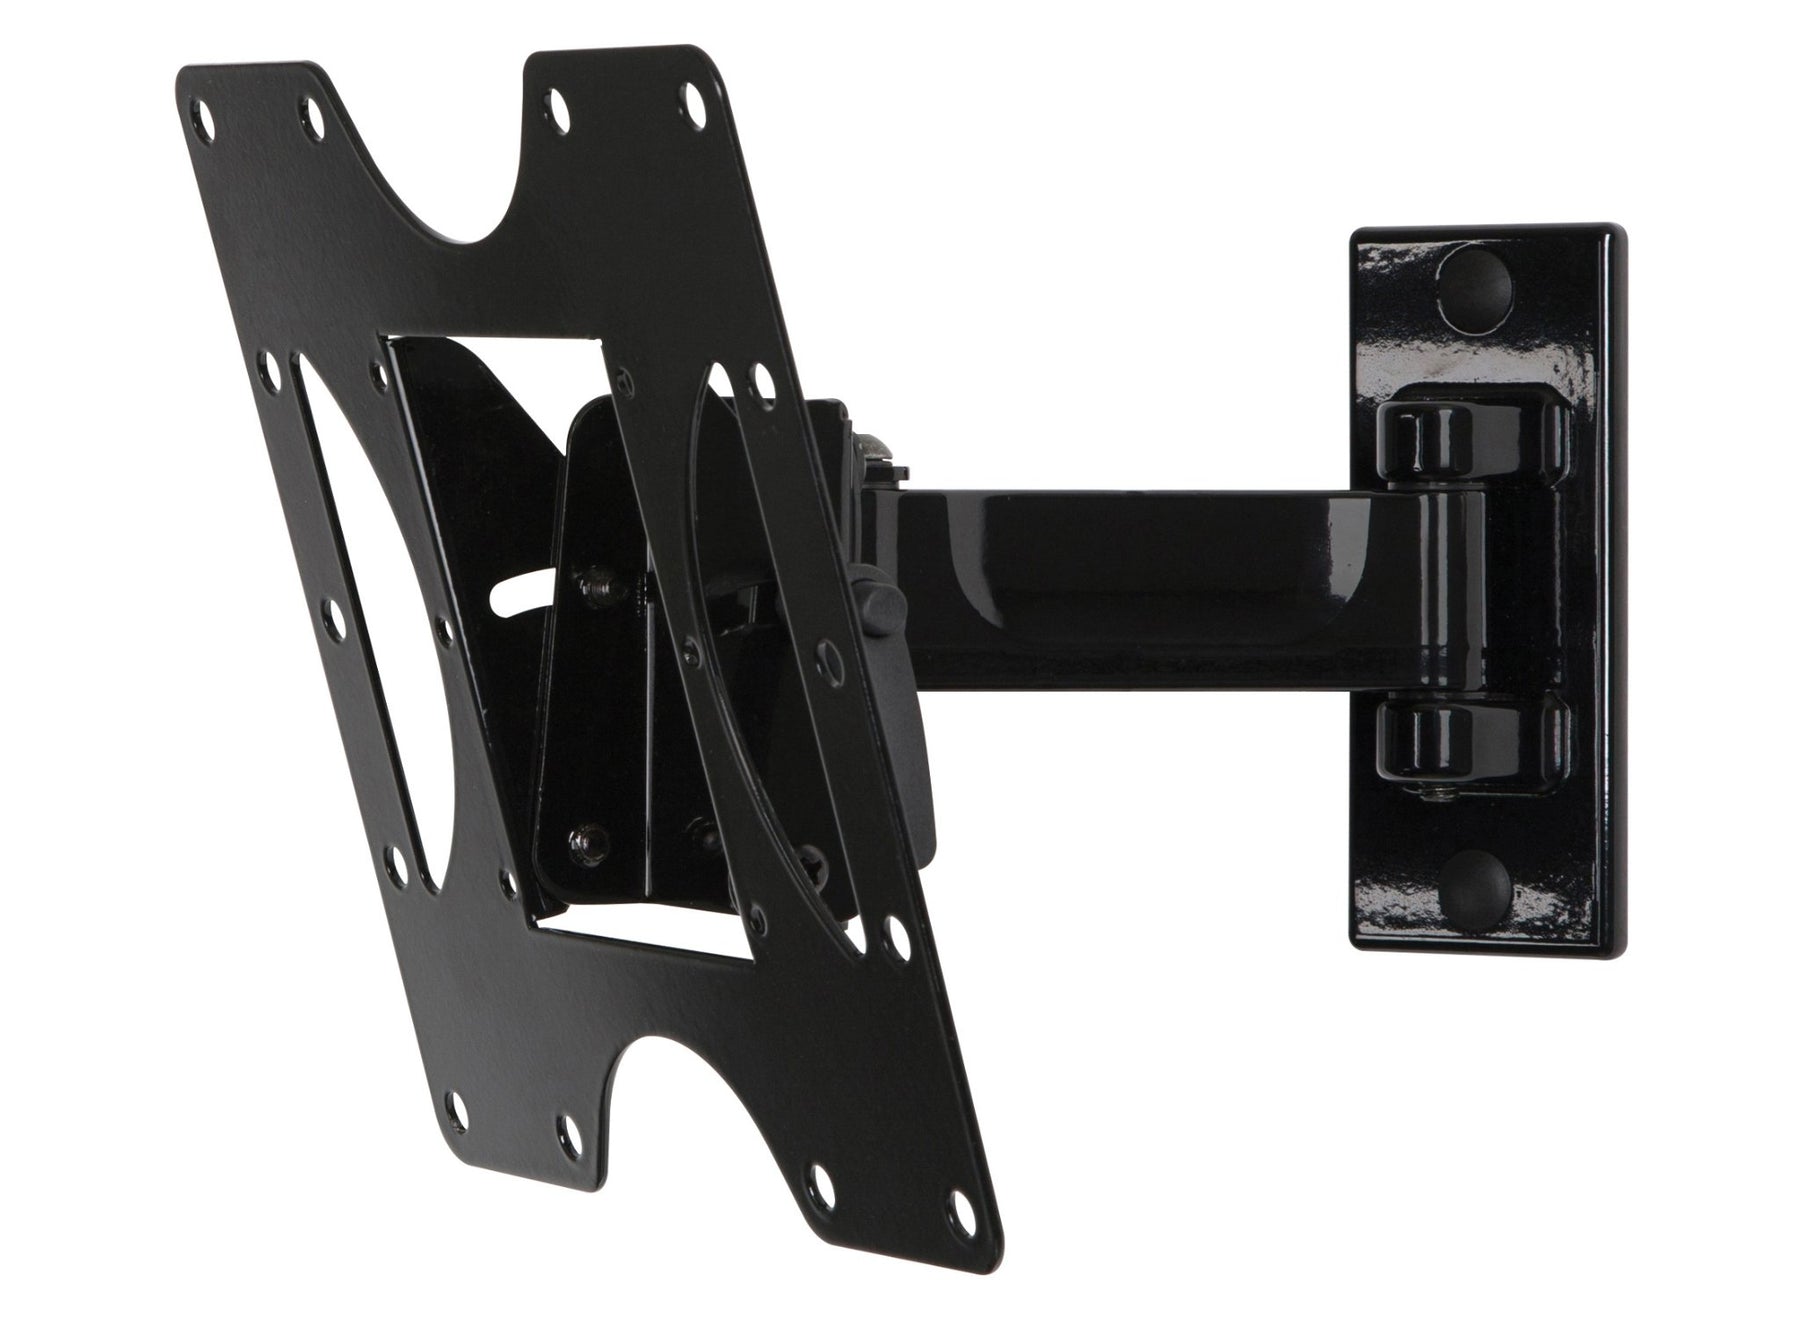 Peerless PARAMOUNT Pivot Wall Mount PP740 - Mounting Kit (Wall Bracket, Mounting Adapter) - Tilts &amp; Swivels - For LCD TV - Steel, Anodized Aluminum - High Gloss Black - Screen Size: 22"-40"